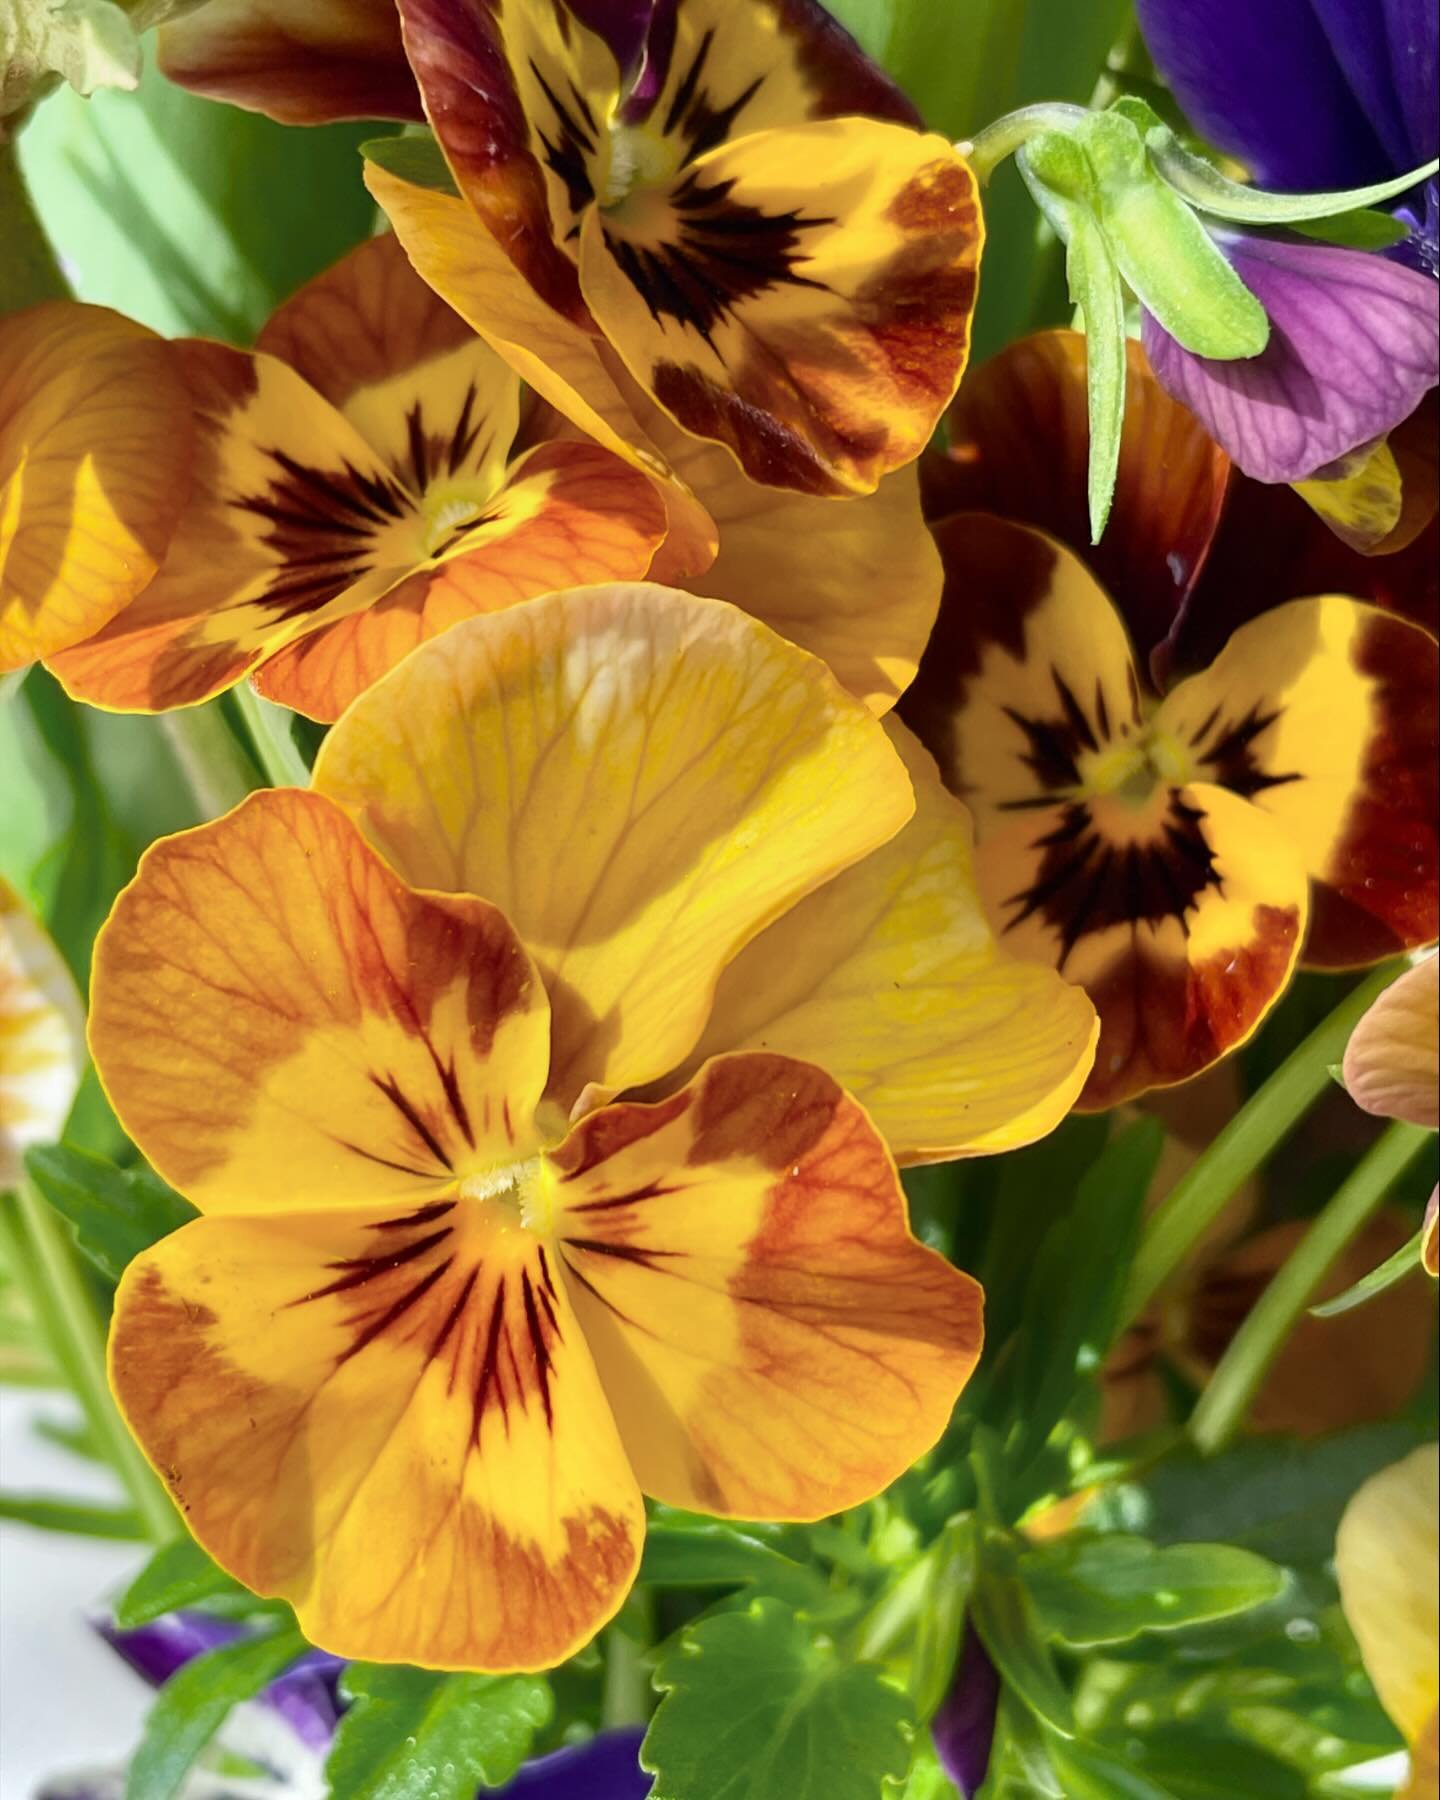 Loving these sweet pansies! I bought them in autumn and used them for flower pounding. Recently, a few stems grew tall enough for a posey!

This spring I started a taller-growing variety from seed, and they&rsquo;re in-ground now, skirting my rose bu